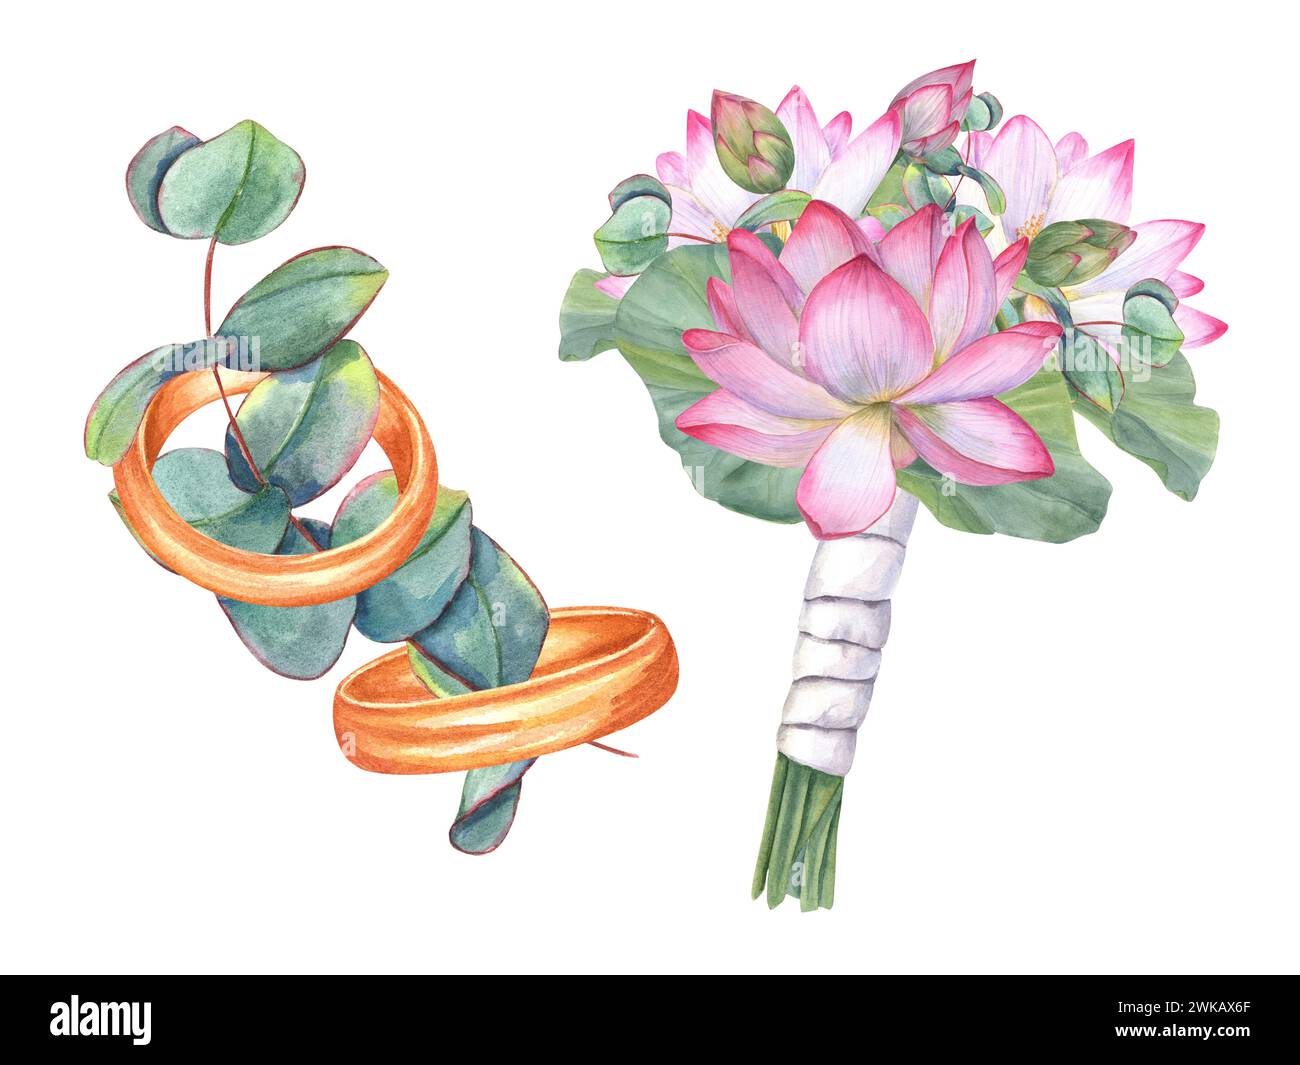 Wedding golden rings decorated eucalyptus. Engagement rings. Wedding bouquet with white pink lotuses and eucalyptus. Lovely boutonniere Stock Photo